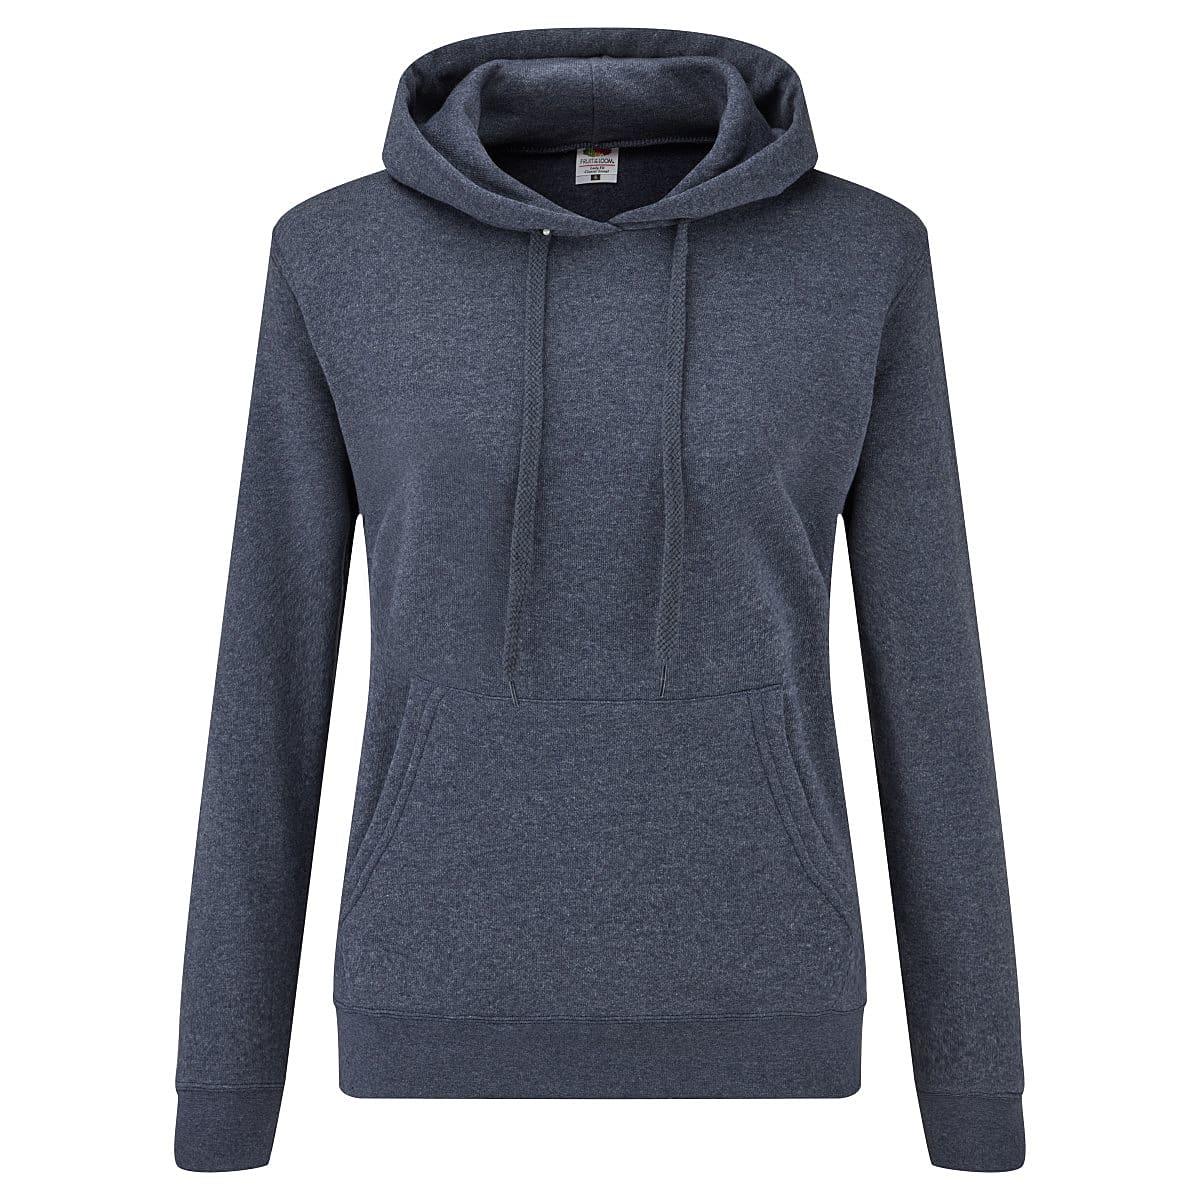 Fruit Of The Loom Lady-Fit Classic Hoodie in Vintage Heather Navy (Product Code: 62038)